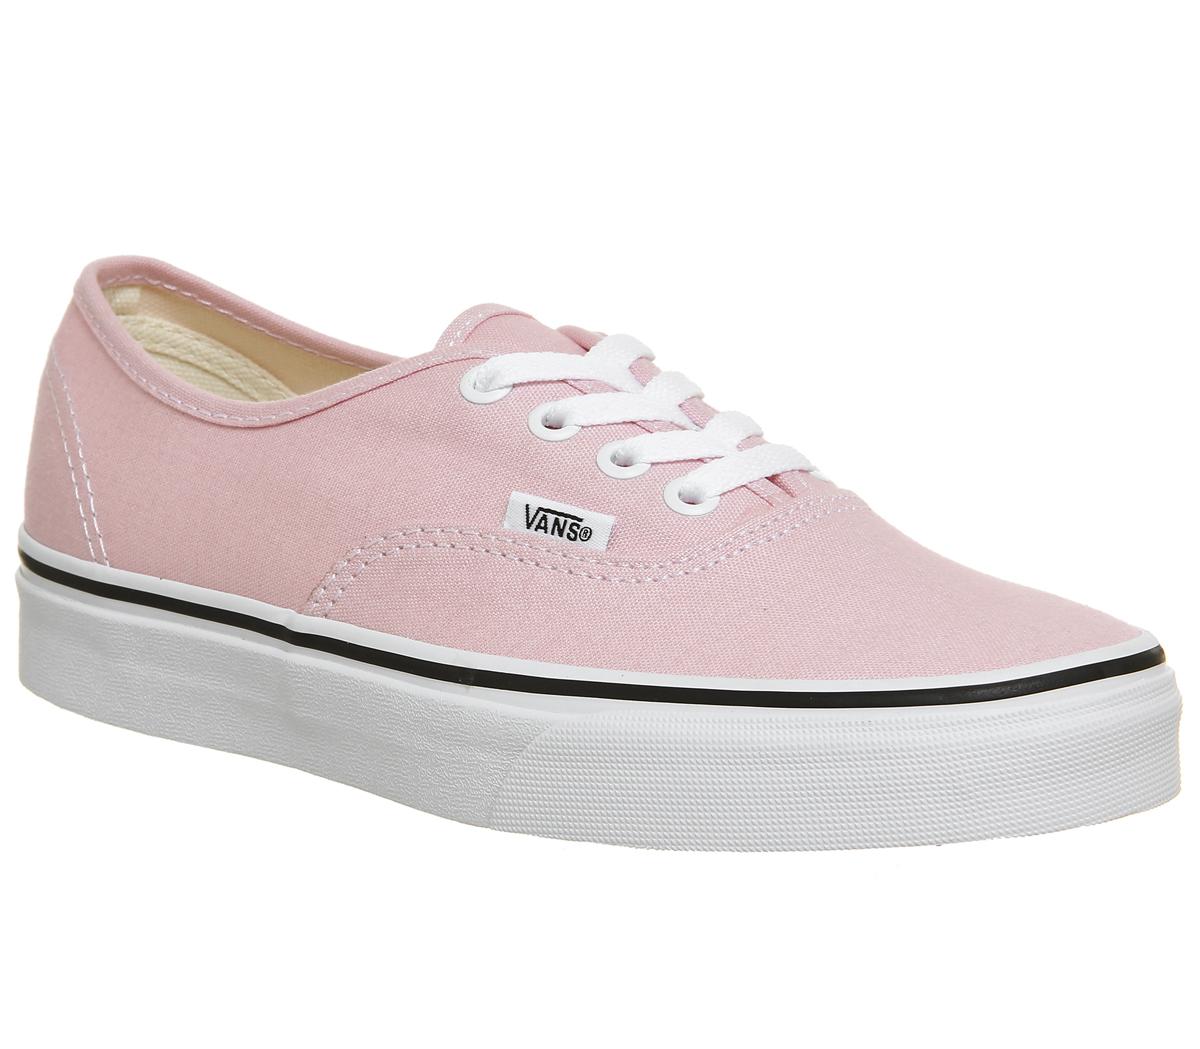 Vans Authentic Trainers Chalk Pink True White Hers Trainers